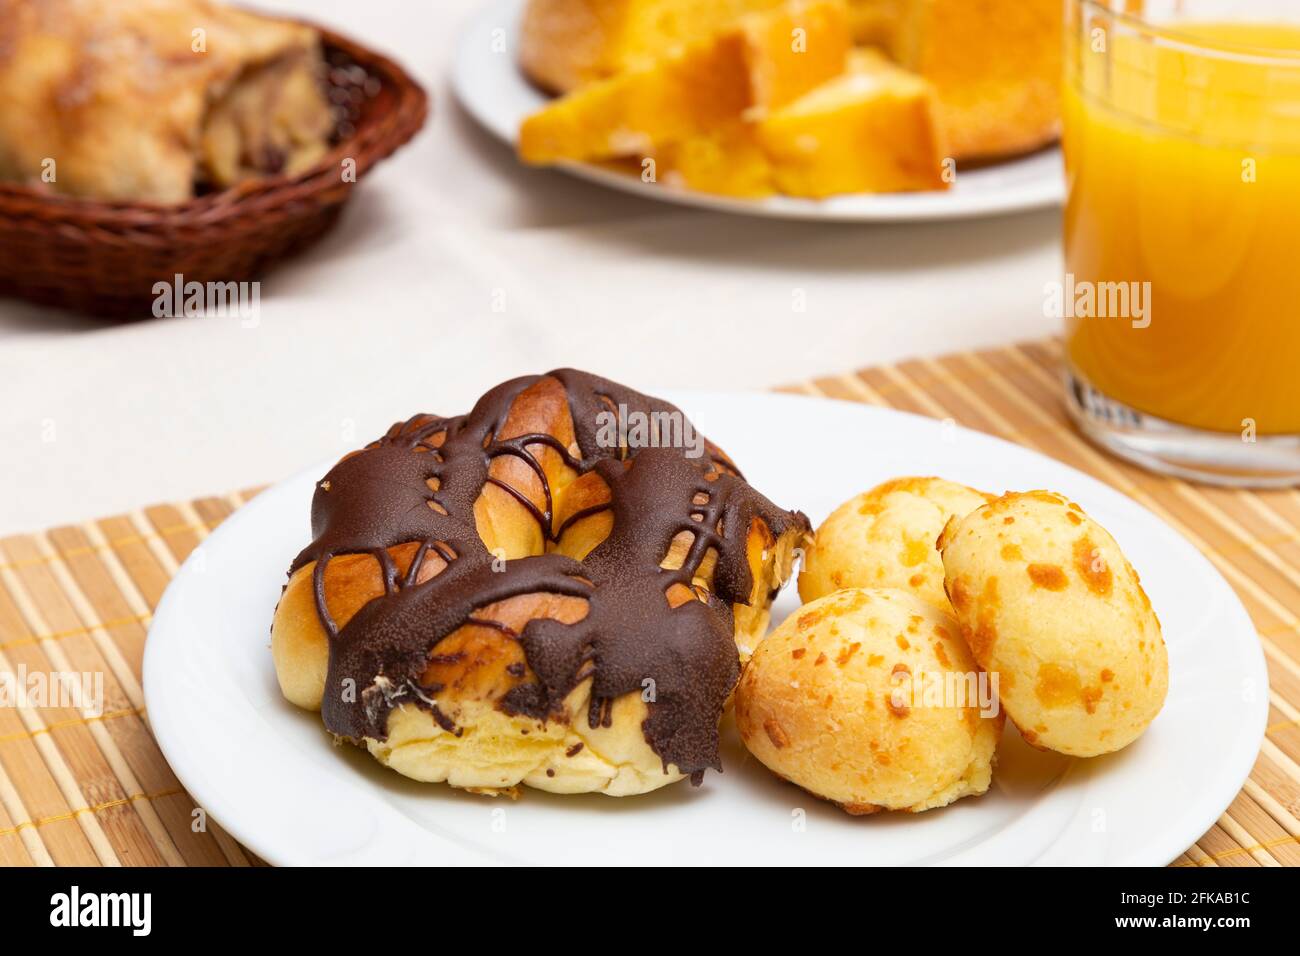 Close up of plate with thread with chocolate icing and cheese bread. Orange juice. Stock Photo